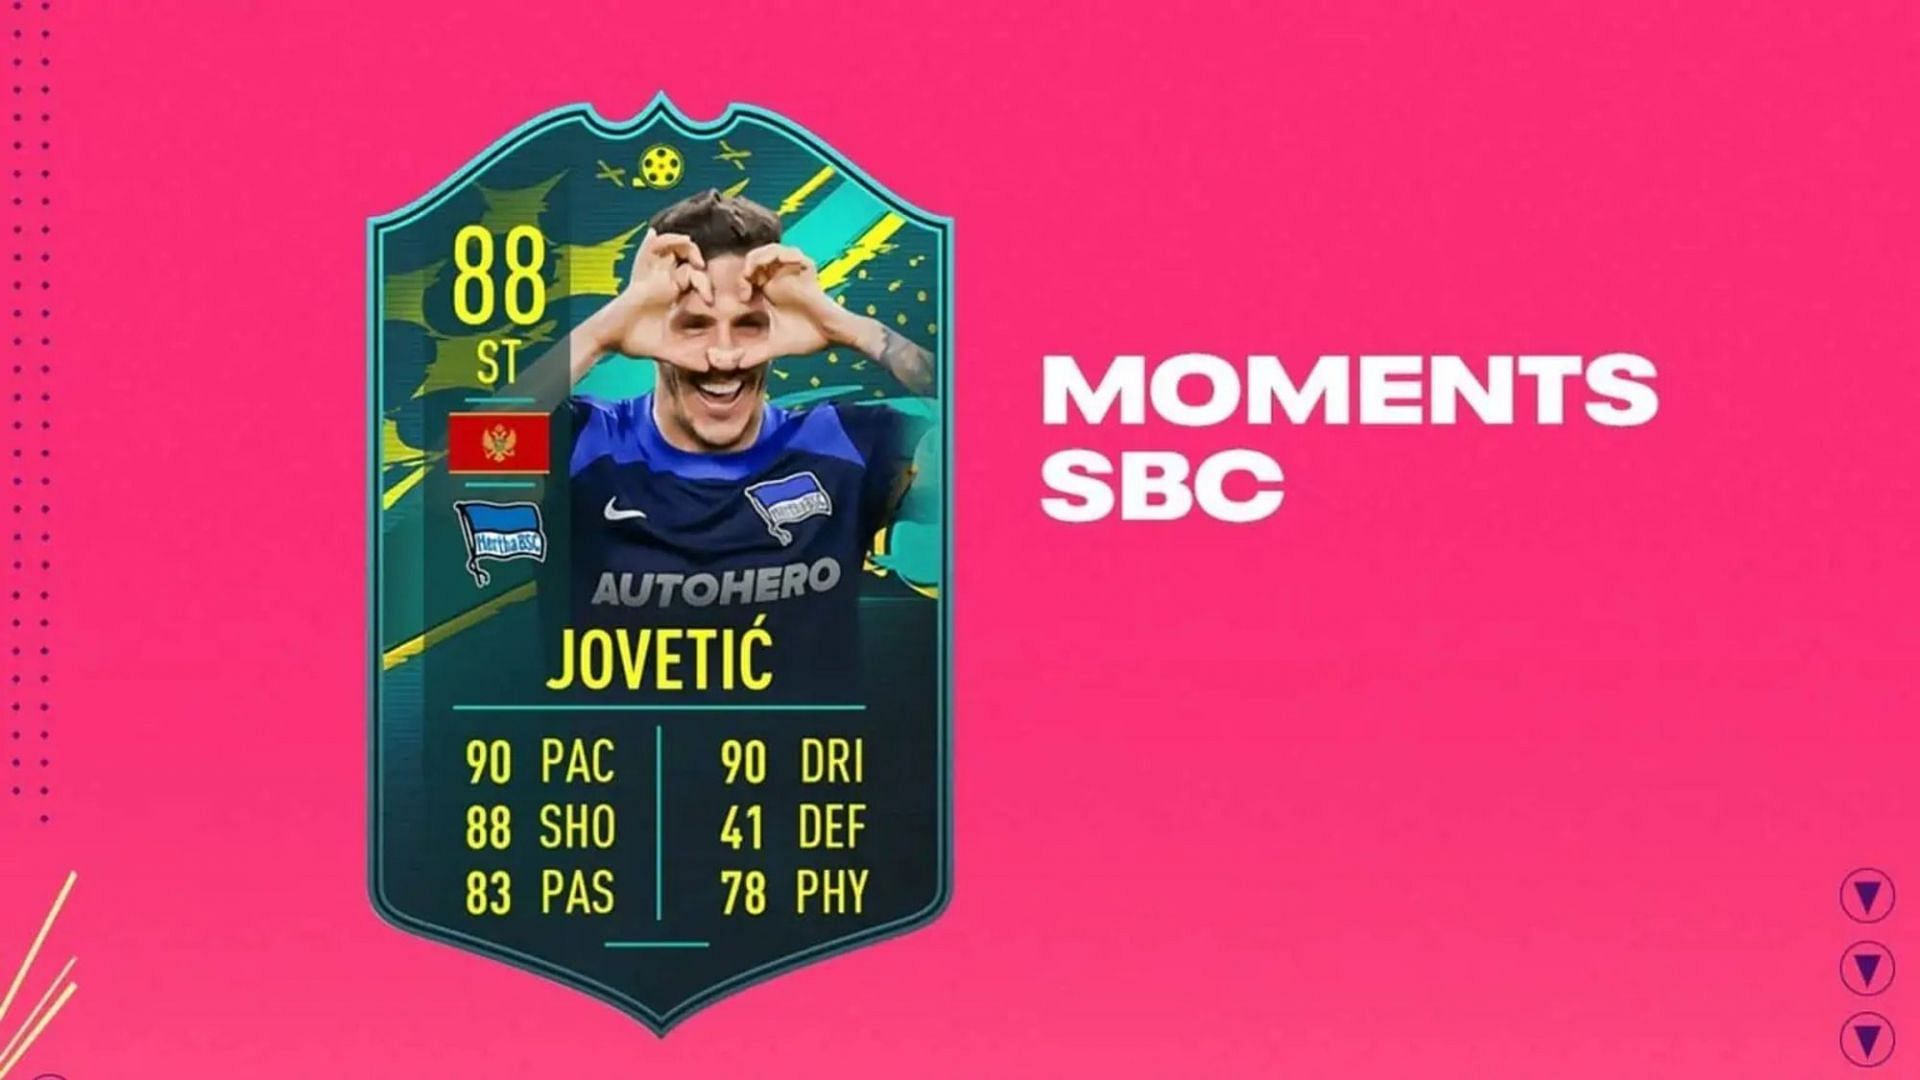 FIFA 23 players can take advantage of the Stevan Jovetic Player SBC to get a promo card for their Ultimate Team squads (Image via EA Sports)